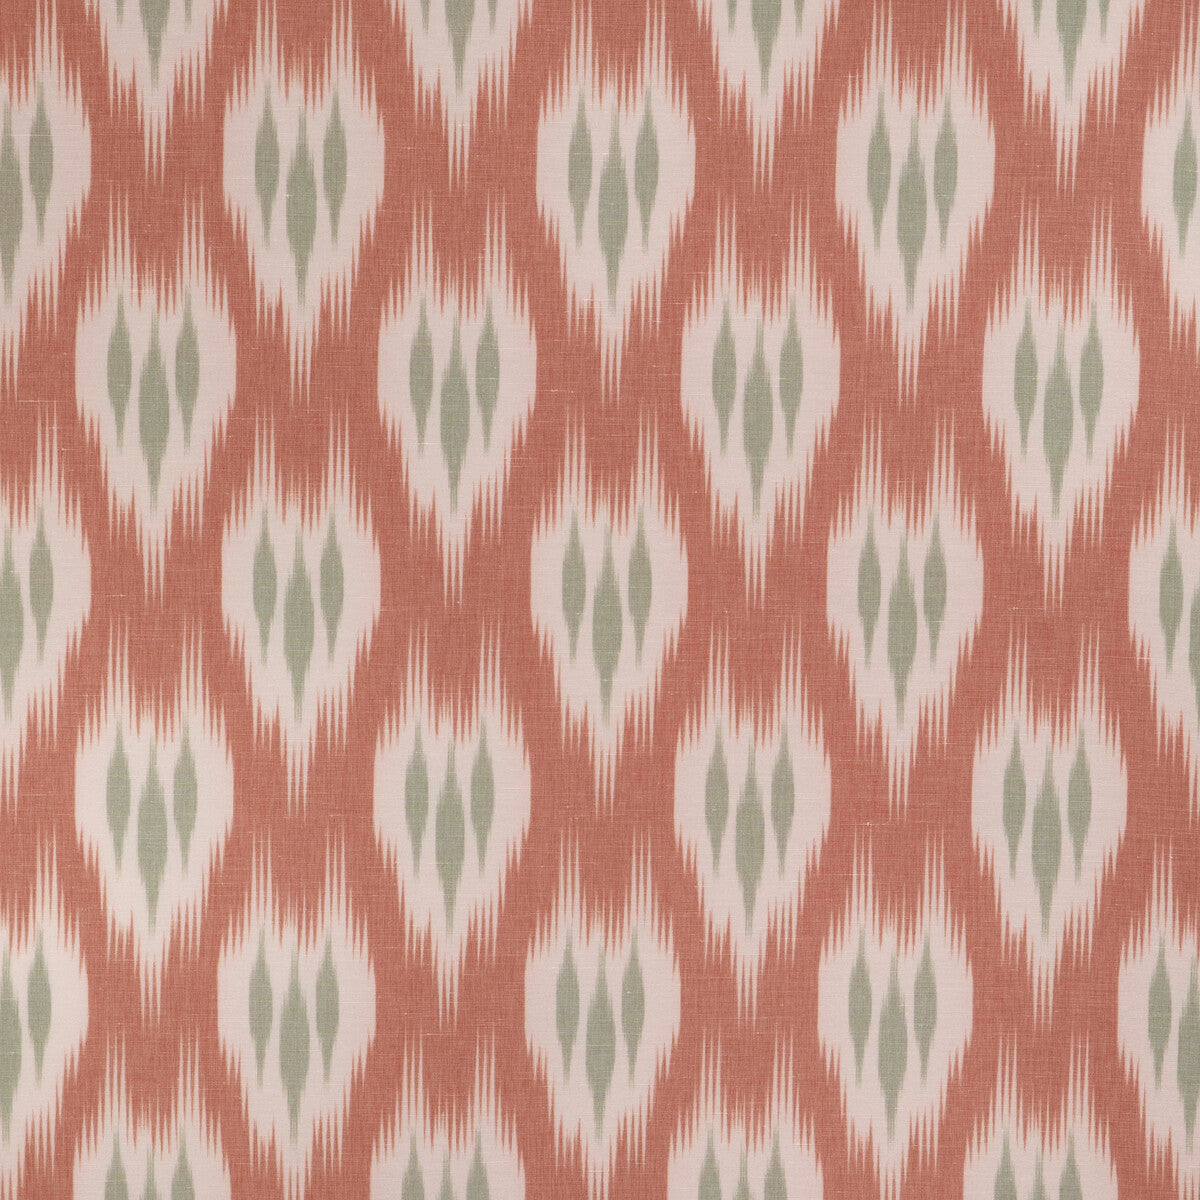 Clare Print fabric in coral color - pattern 2023102.319.0 - by Lee Jofa in the Clare Prints collection